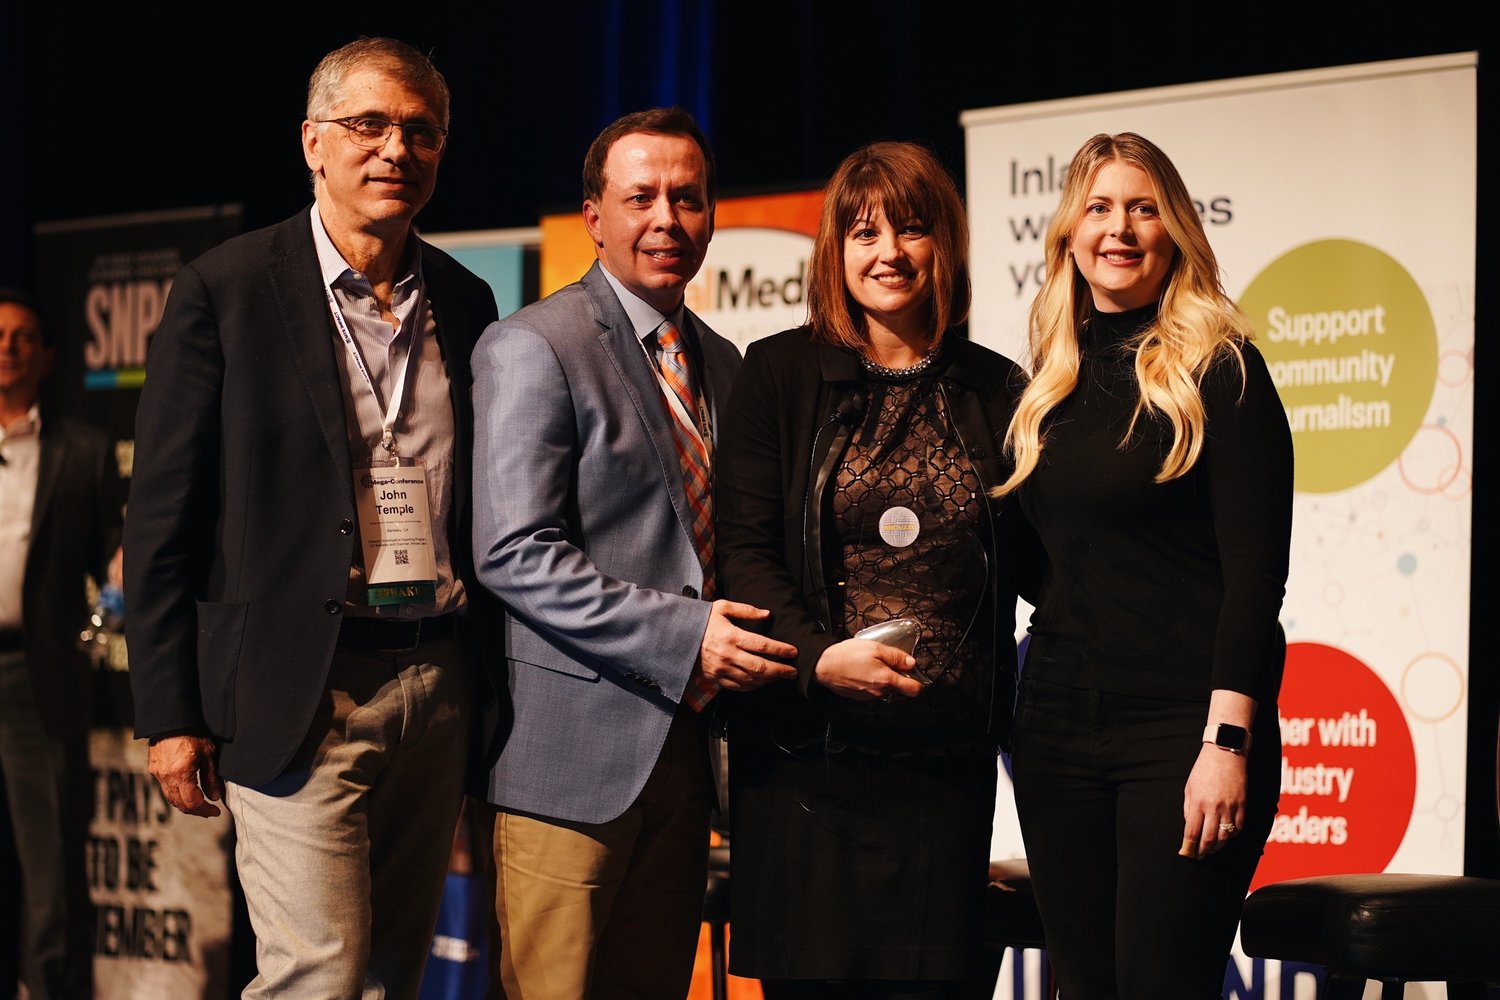 Pictured left to right: John Temple (one of the Mega-Innovation Award judges), and Jason Taylor, Rebecca Capparelli and Lyndsi Lane of GateHouse Live.